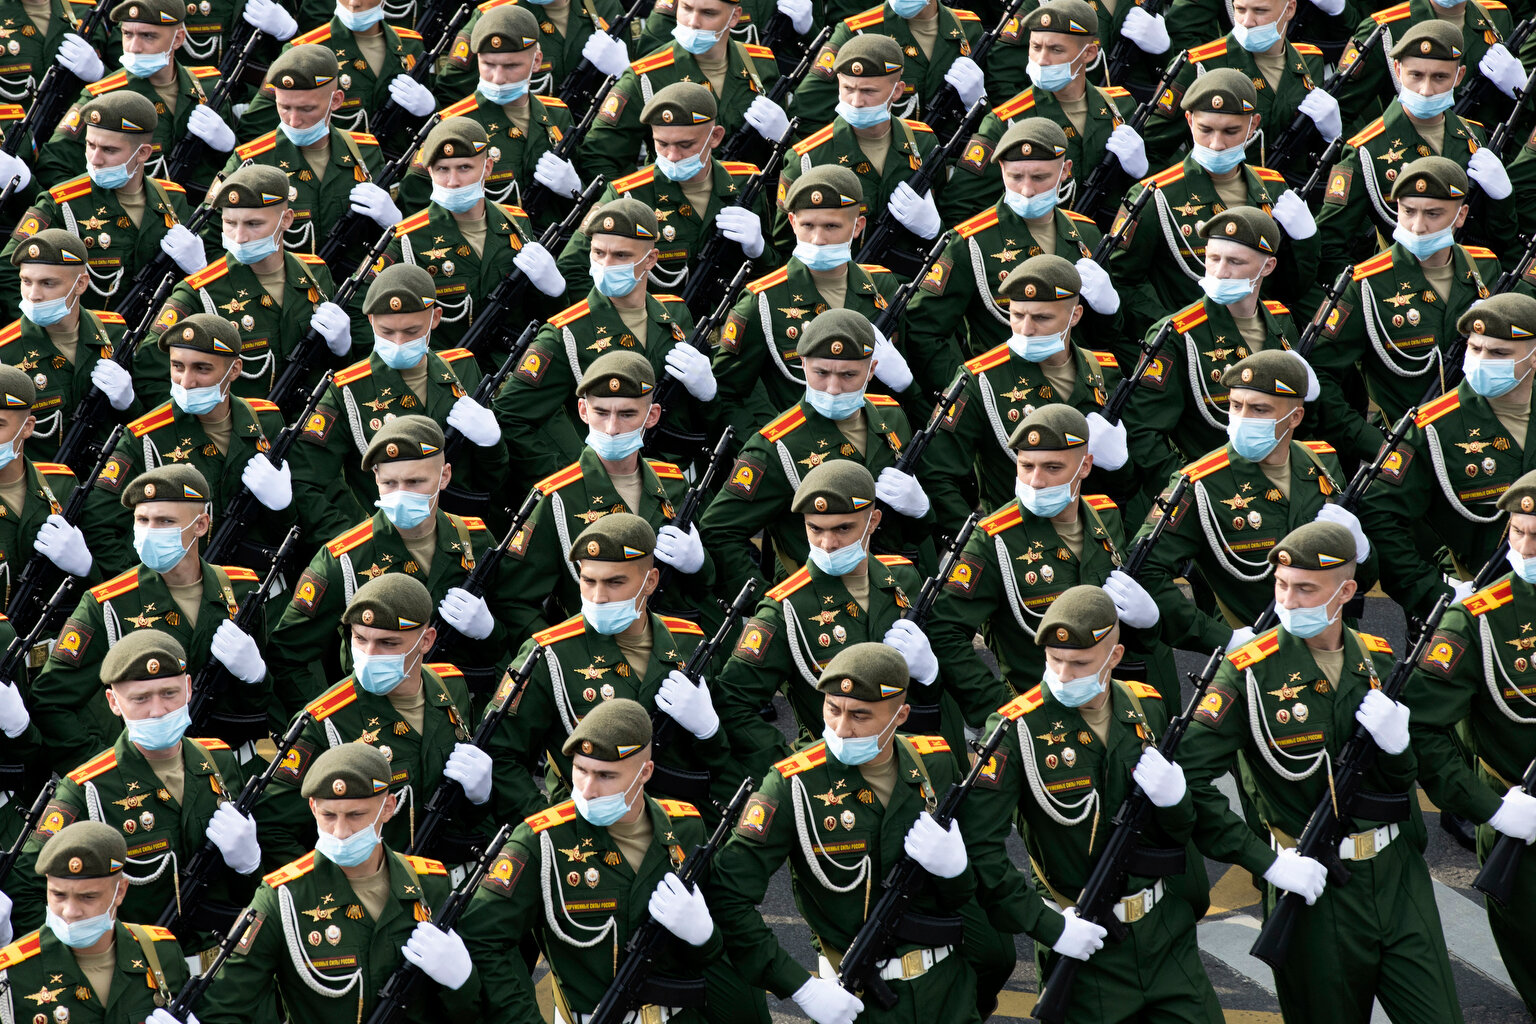  Russian soldiers wearing face masks to protect against coronavirus, march toward Red Square to attend a dress rehearsal for the Victory Day military parade in Moscow, Russia, Saturday, June 20, 2020. (AP Photo/Alexander Zemlianichenko) 